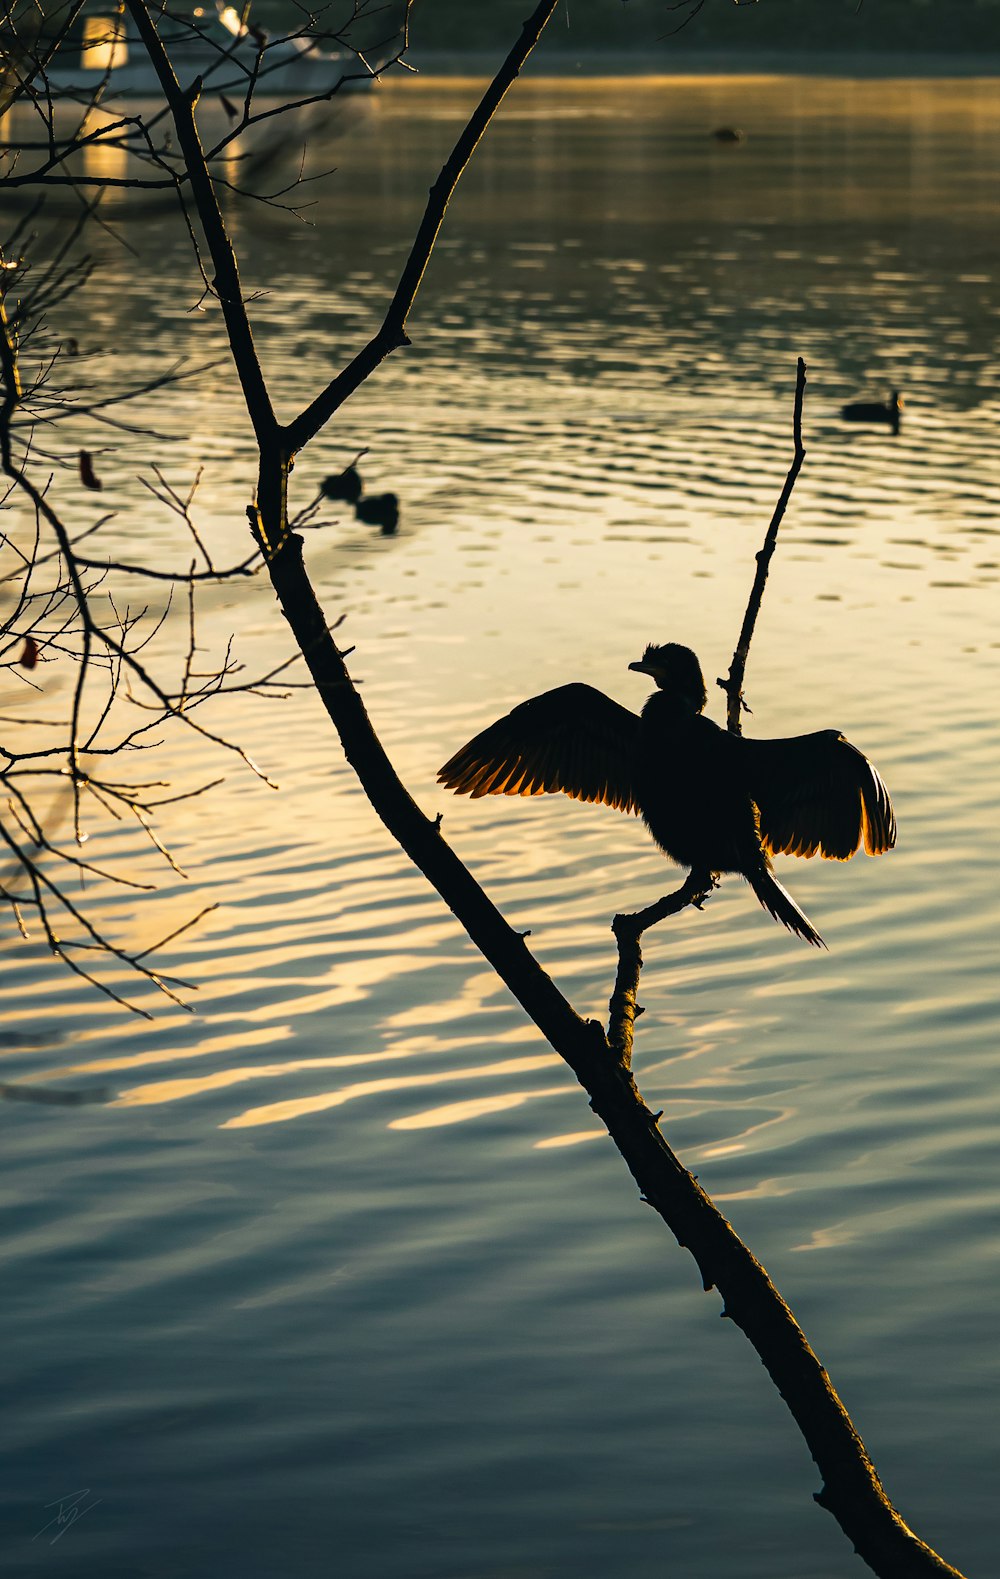 a bird sitting on a tree branch in front of a body of water